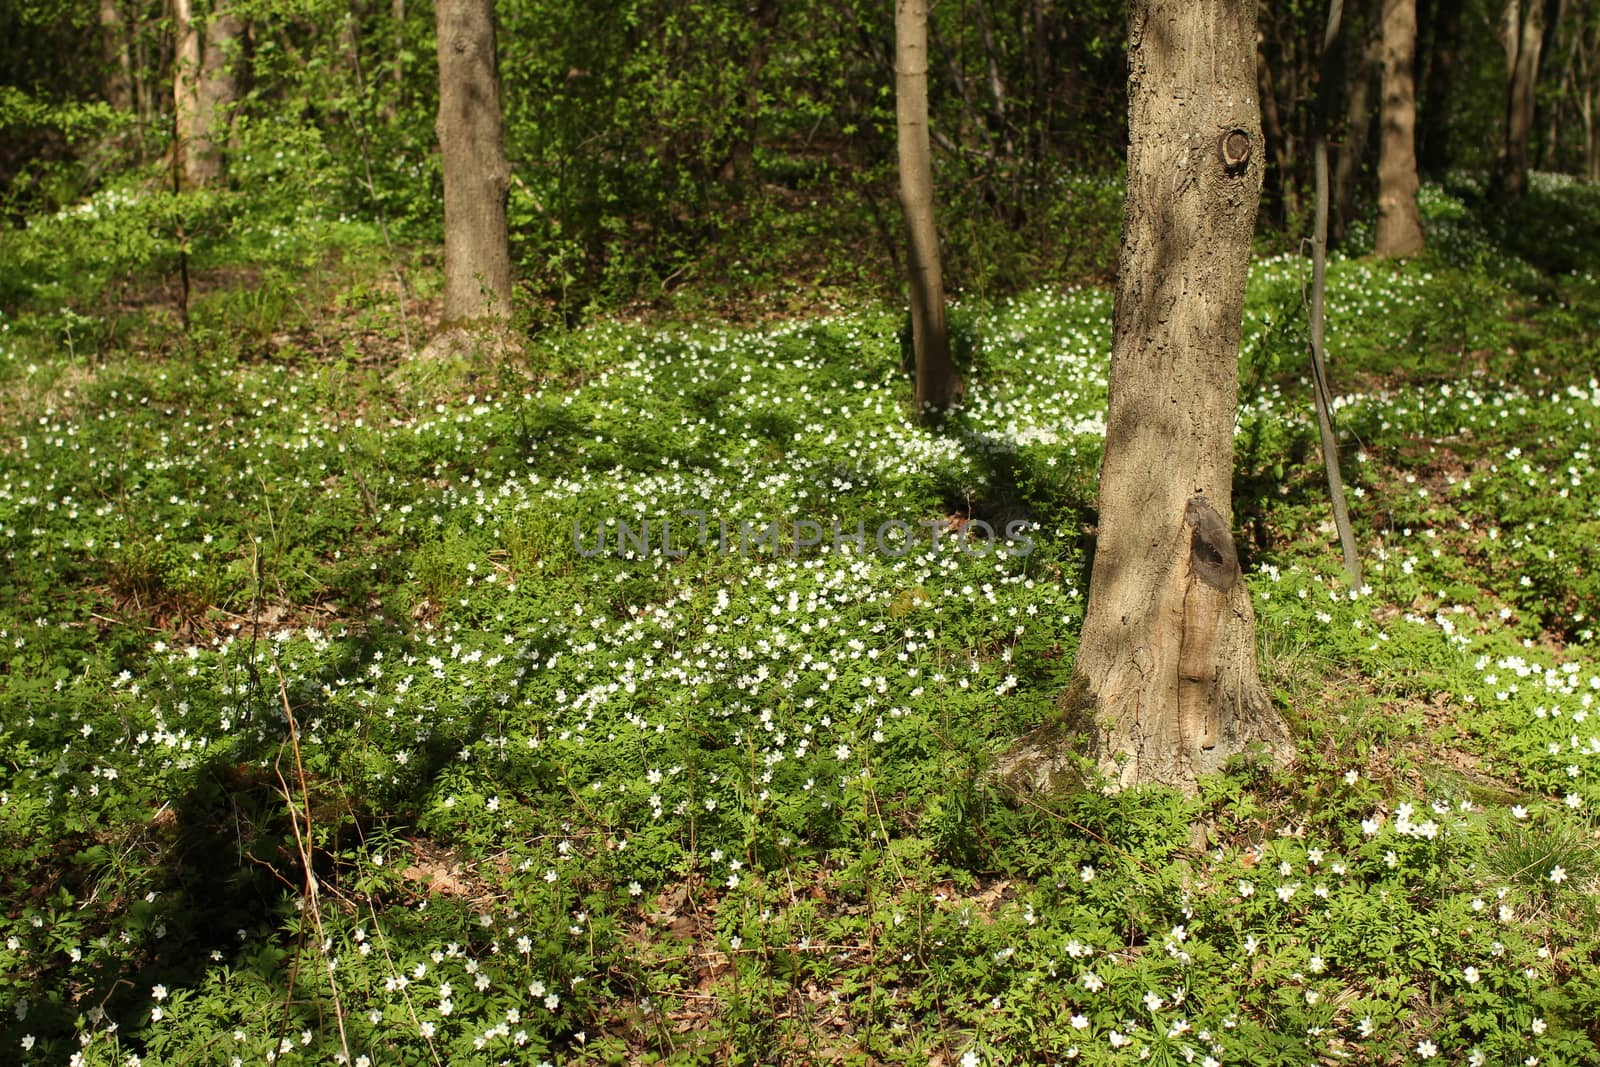 White wood anemone flowers Spring primroses in forest